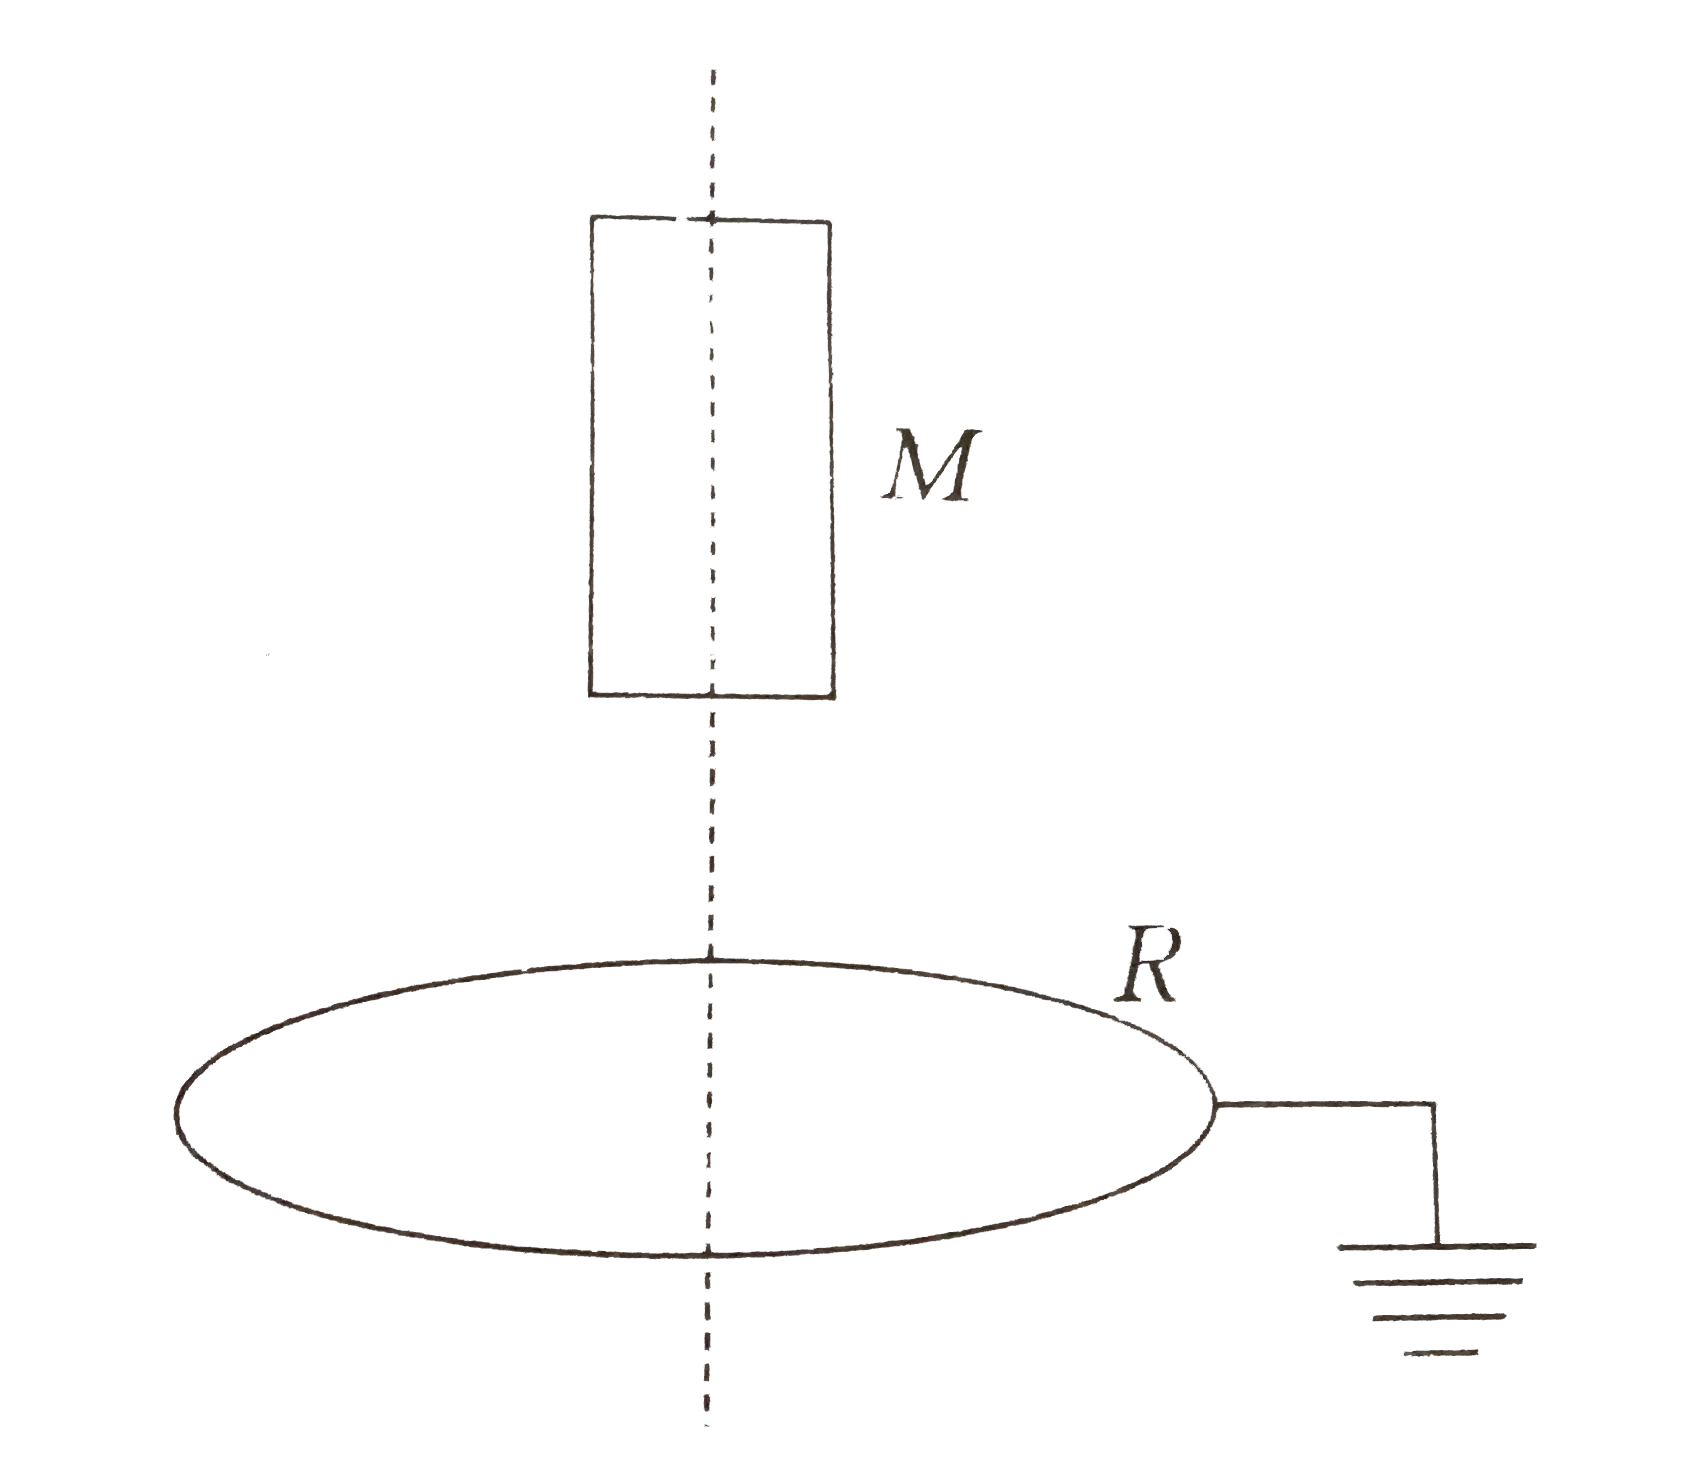 A small magnet M is allowed to fall through a fixed horizontal conducting ring R. Let g be the acceleration due to gravity. The acceleration of M, a will be